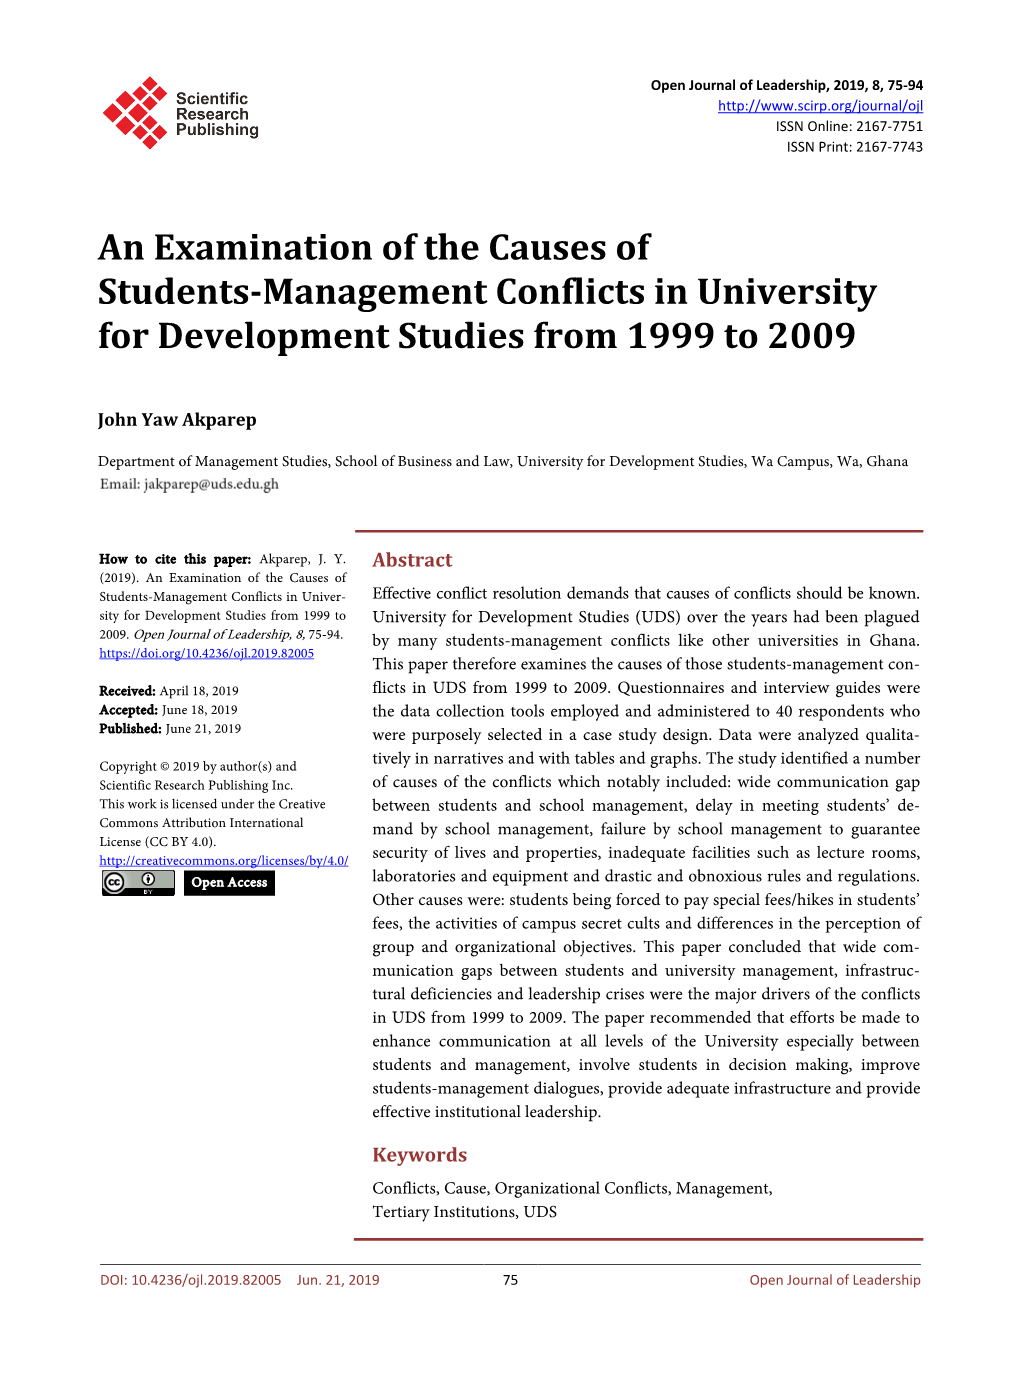 An Examination of the Causes of Students-Management Conflicts in University for Development Studies from 1999 to 2009